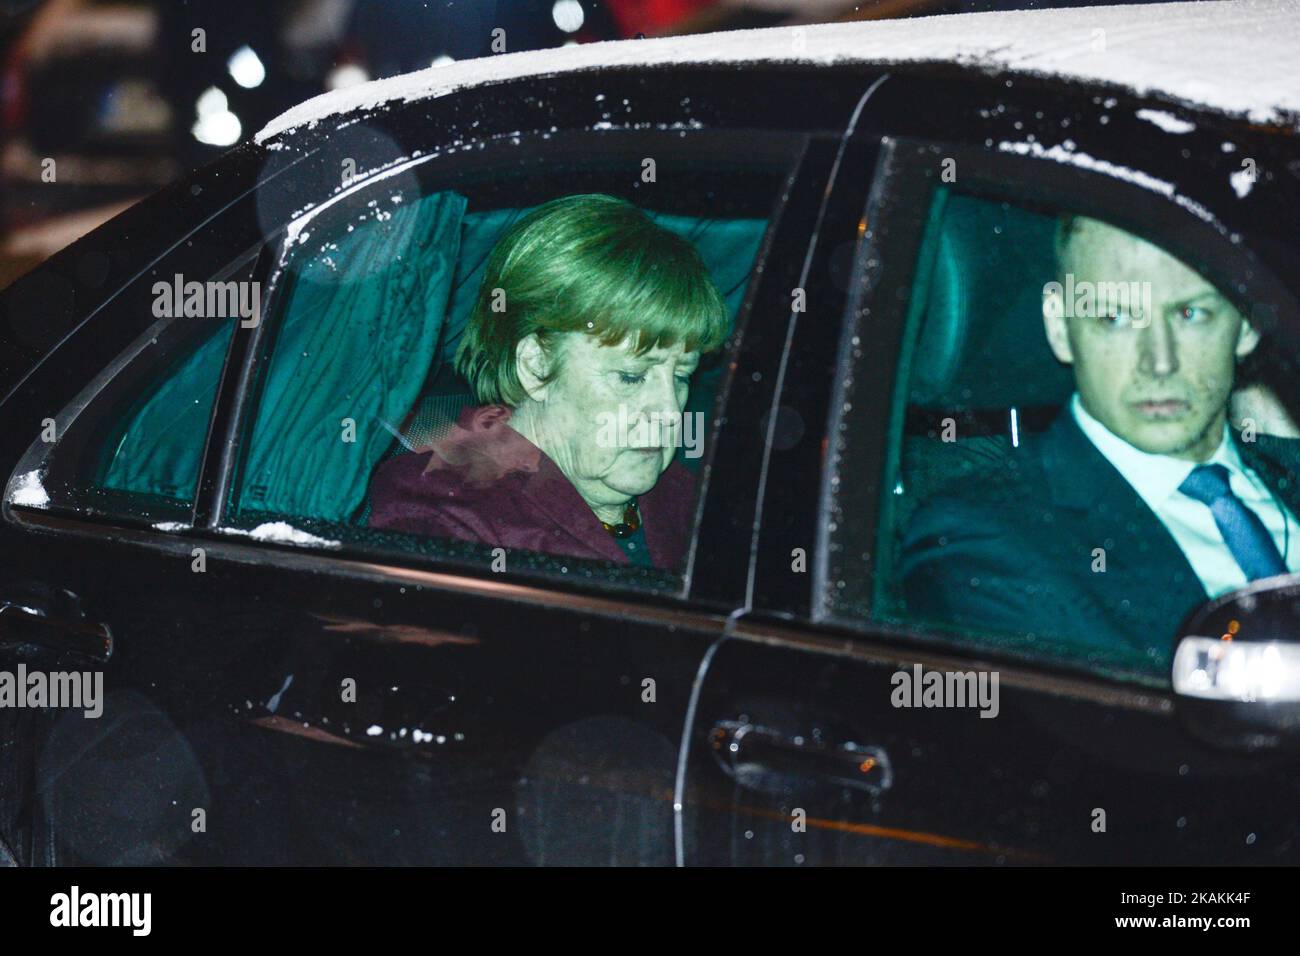 The Chancellor of Germany, Angela Merkel, leaves the Bristol Hotel after she met the Leader of PiS (Law and Justice), Jaroslaw Kaczynski, during her visit to Poland. On Tuesday, 7 February 2017, in Warsaw, Poland. (Photo by Artur Widak/NurPhoto) *** Please Use Credit from Credit Field ***  Stock Photo